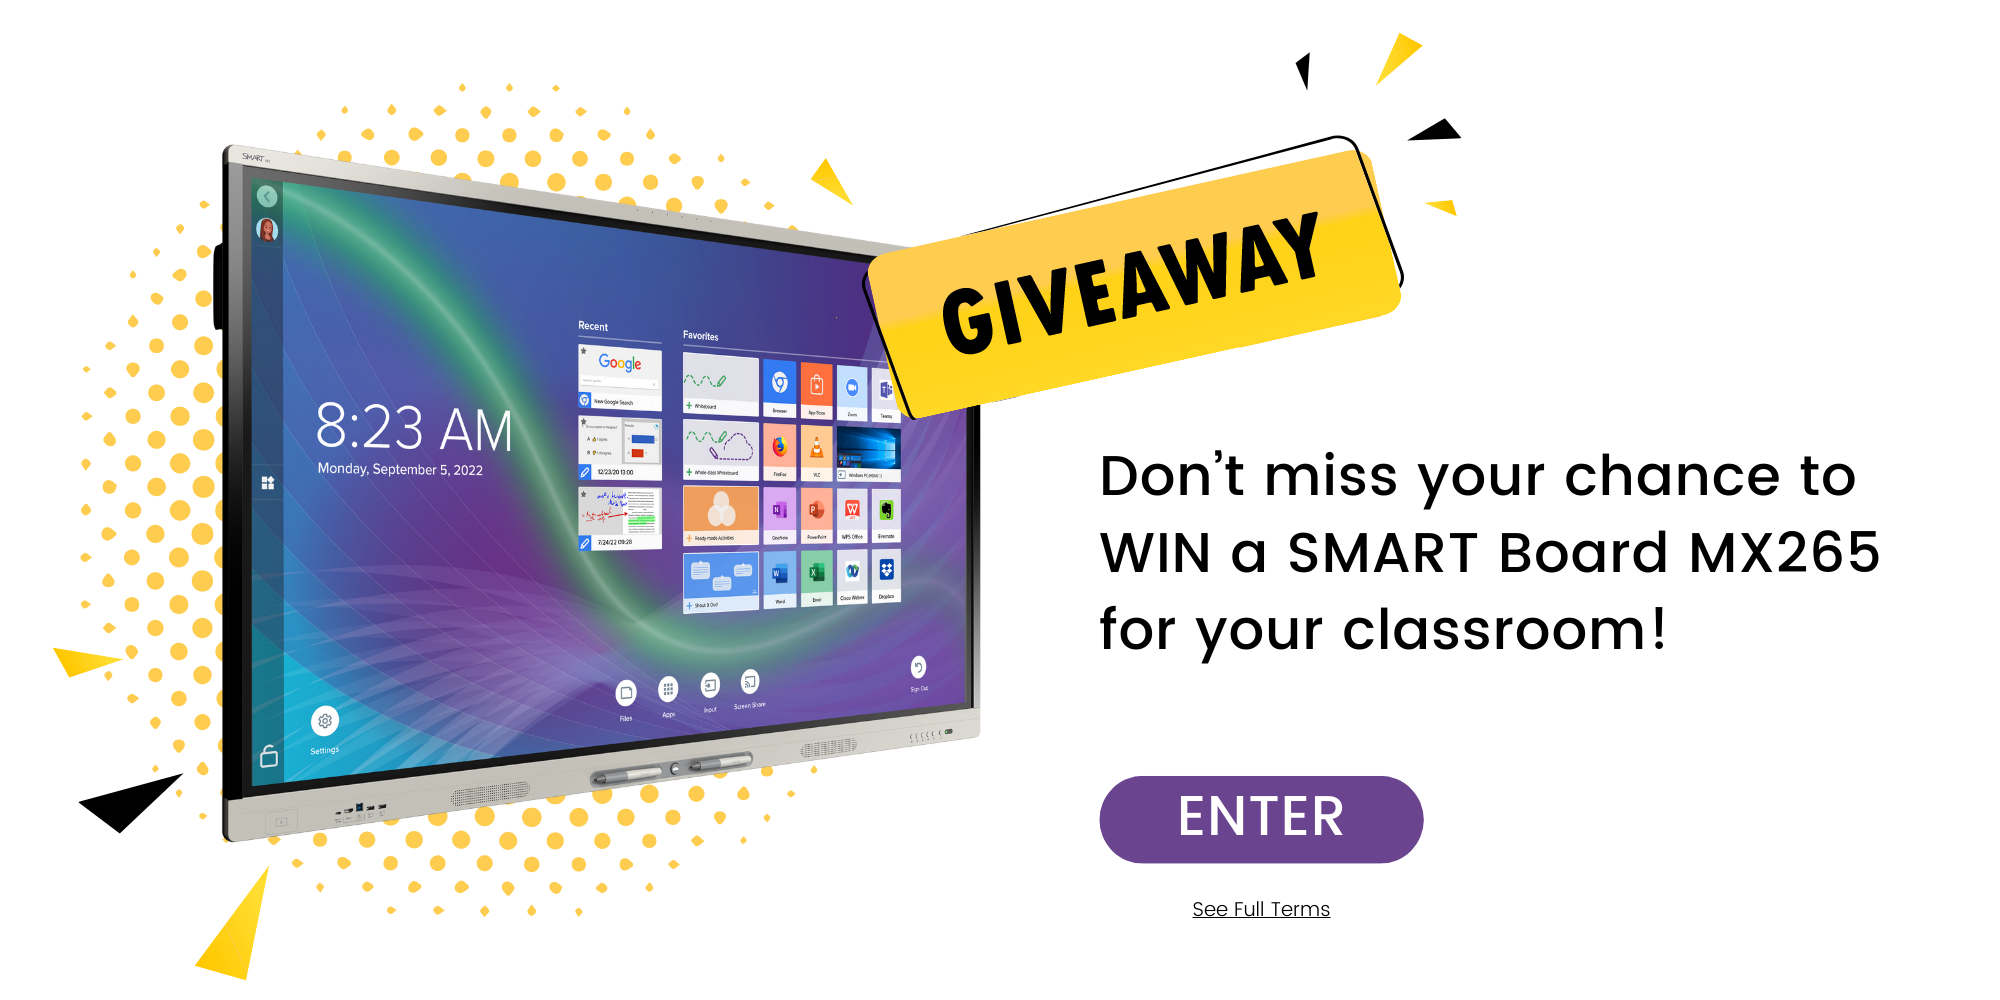 WIN a SMART Board MX265 for your classroom!